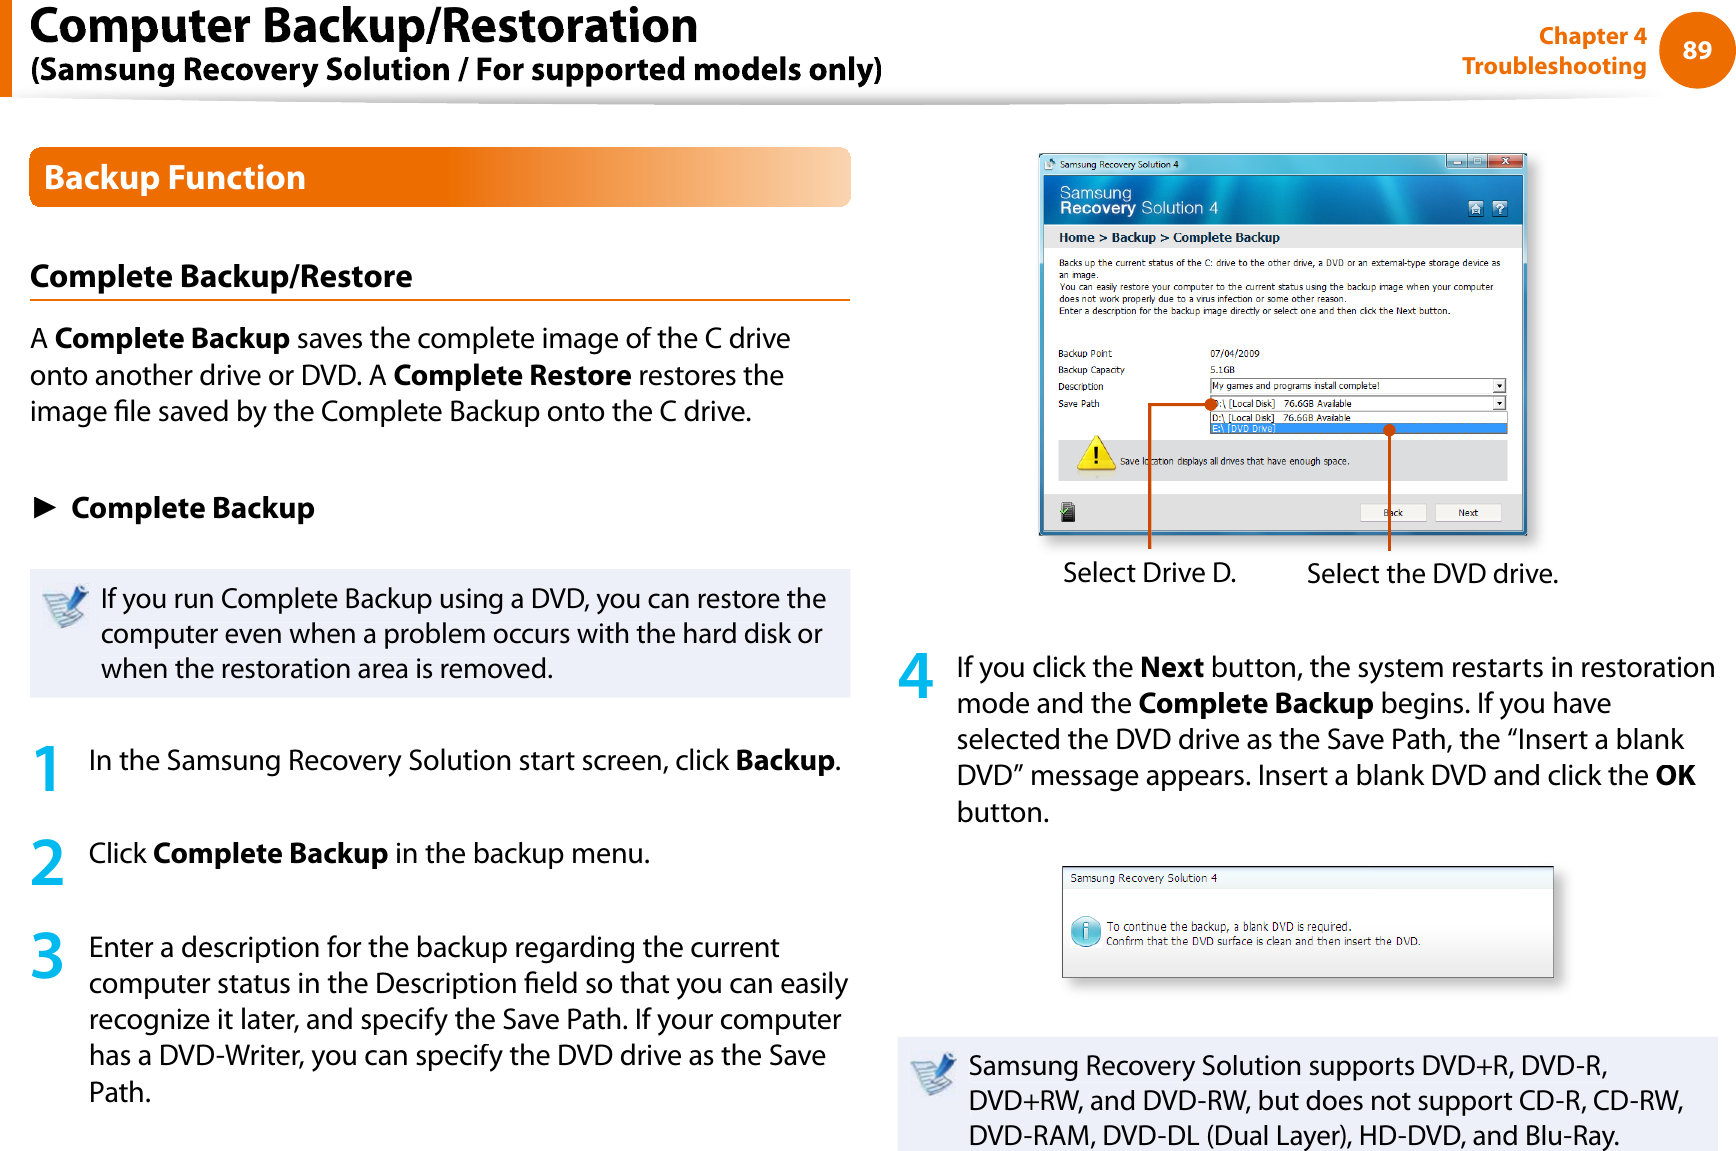 89Chapter 4TroubleshootingBackup FunctionComplete Backup/RestoreAComplete Backup saves the complete image of the C driveonto another drive or DVD. A Complete Restore restores theimage le saved by the Complete Backup onto the C drive.ŹComplete BackupIf you run Complete Backup using a DVD, you can restore thecomputer even when a problem occurs with the hard disk orwhen the restoration area is removed.1In the Samsung Recovery Solution start screen, click Backup.2Click Complete Backup in the backup menu.3Enter a description for the backup regarding the currentcomputer status in the Description eld so that you can easilyrecognize it later, and specify the Save Path. If your computerhas a DVD-Writer, you can specify the DVD drive as the SavePath.Select Drive D.Select the DVD drive.4If you click theNext button, the system restarts in restorationmode and theComplete Backup begins. If you haveselected the DVD drive as the Save Path, the “Insert a blank DVD” message appears. Insert a blank DVD and click theOKbutton.Samsung Recovery Solution supports DVD+R, DVD-R,DVD+RW, and DVD-RW, but does not support CD-R, CD-RW,DVD-RAM, DVD-DL (Dual Layer), HD-DVD, and Blu-Ray.Computer Backup/Restoration